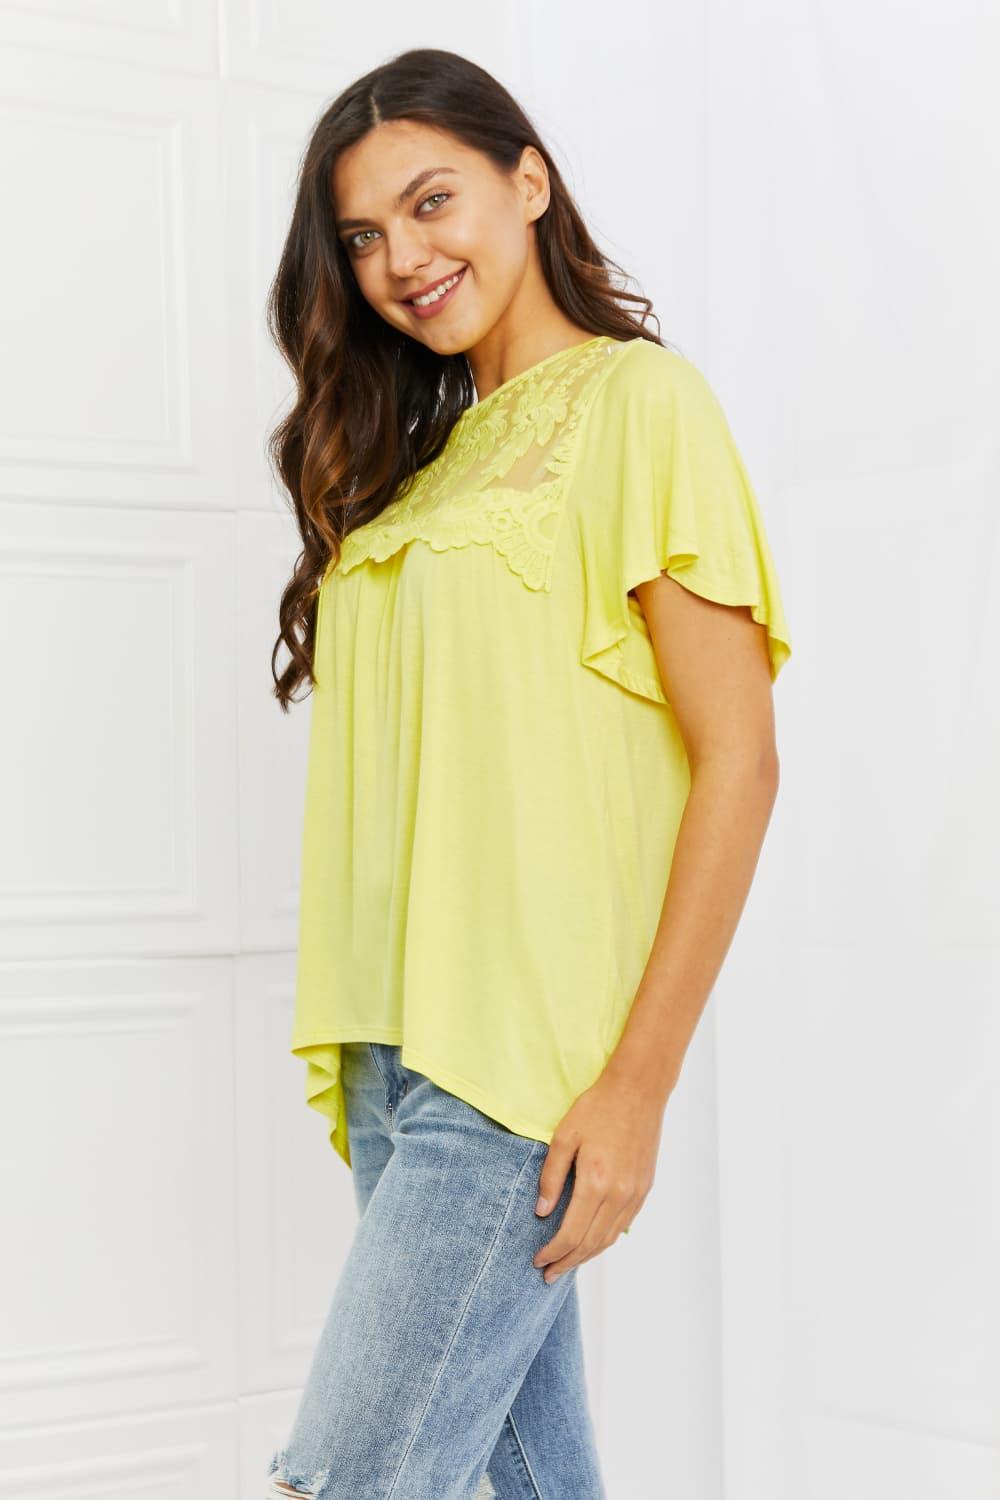 Culture Code Ready To Go Full Size Lace Embroidered Top in Yellow Mousse - Glamorous Boutique USA L.L.C.